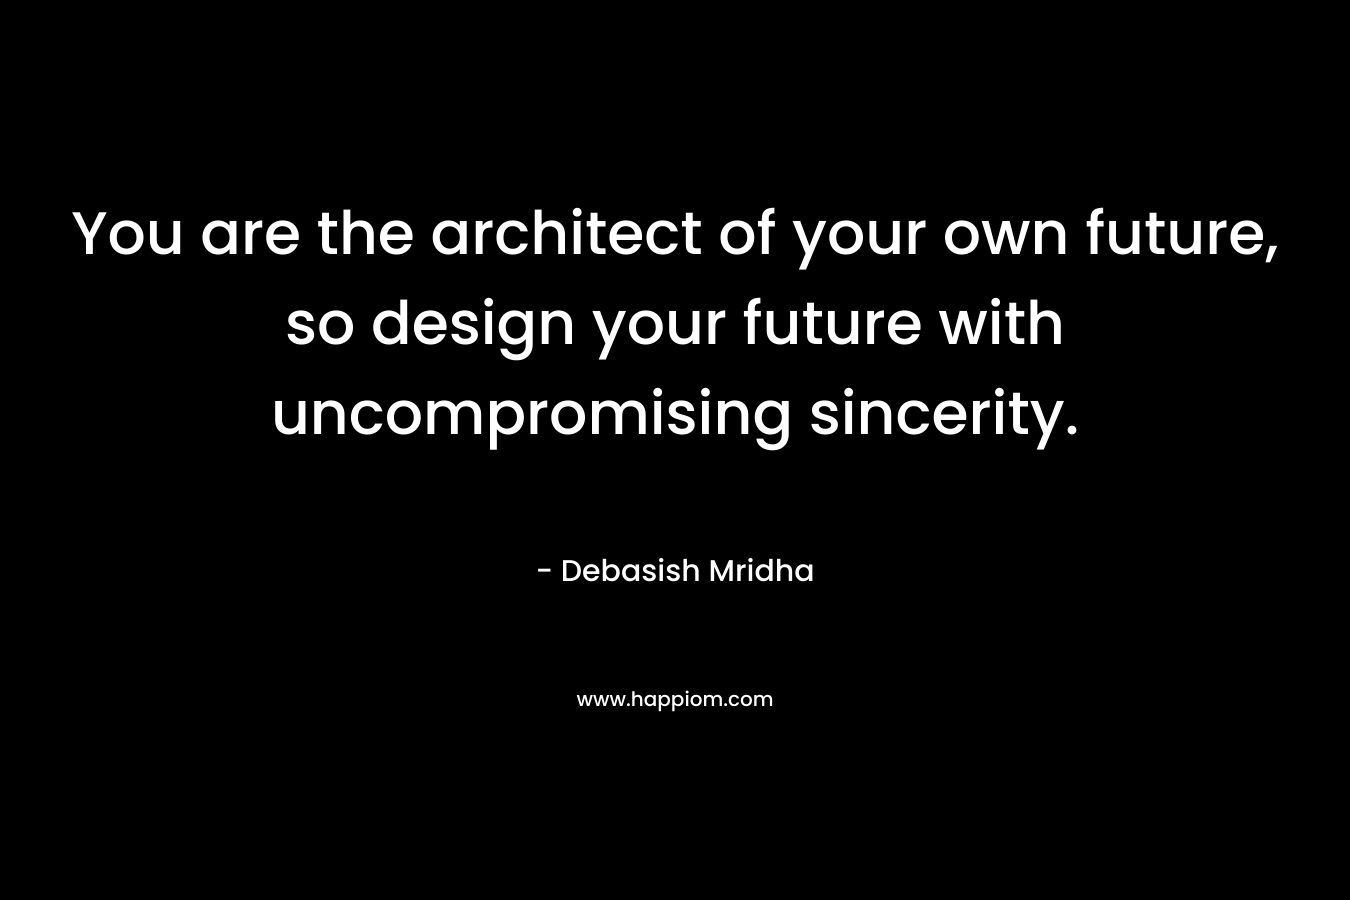 You are the architect of your own future, so design your future with uncompromising sincerity. – Debasish Mridha